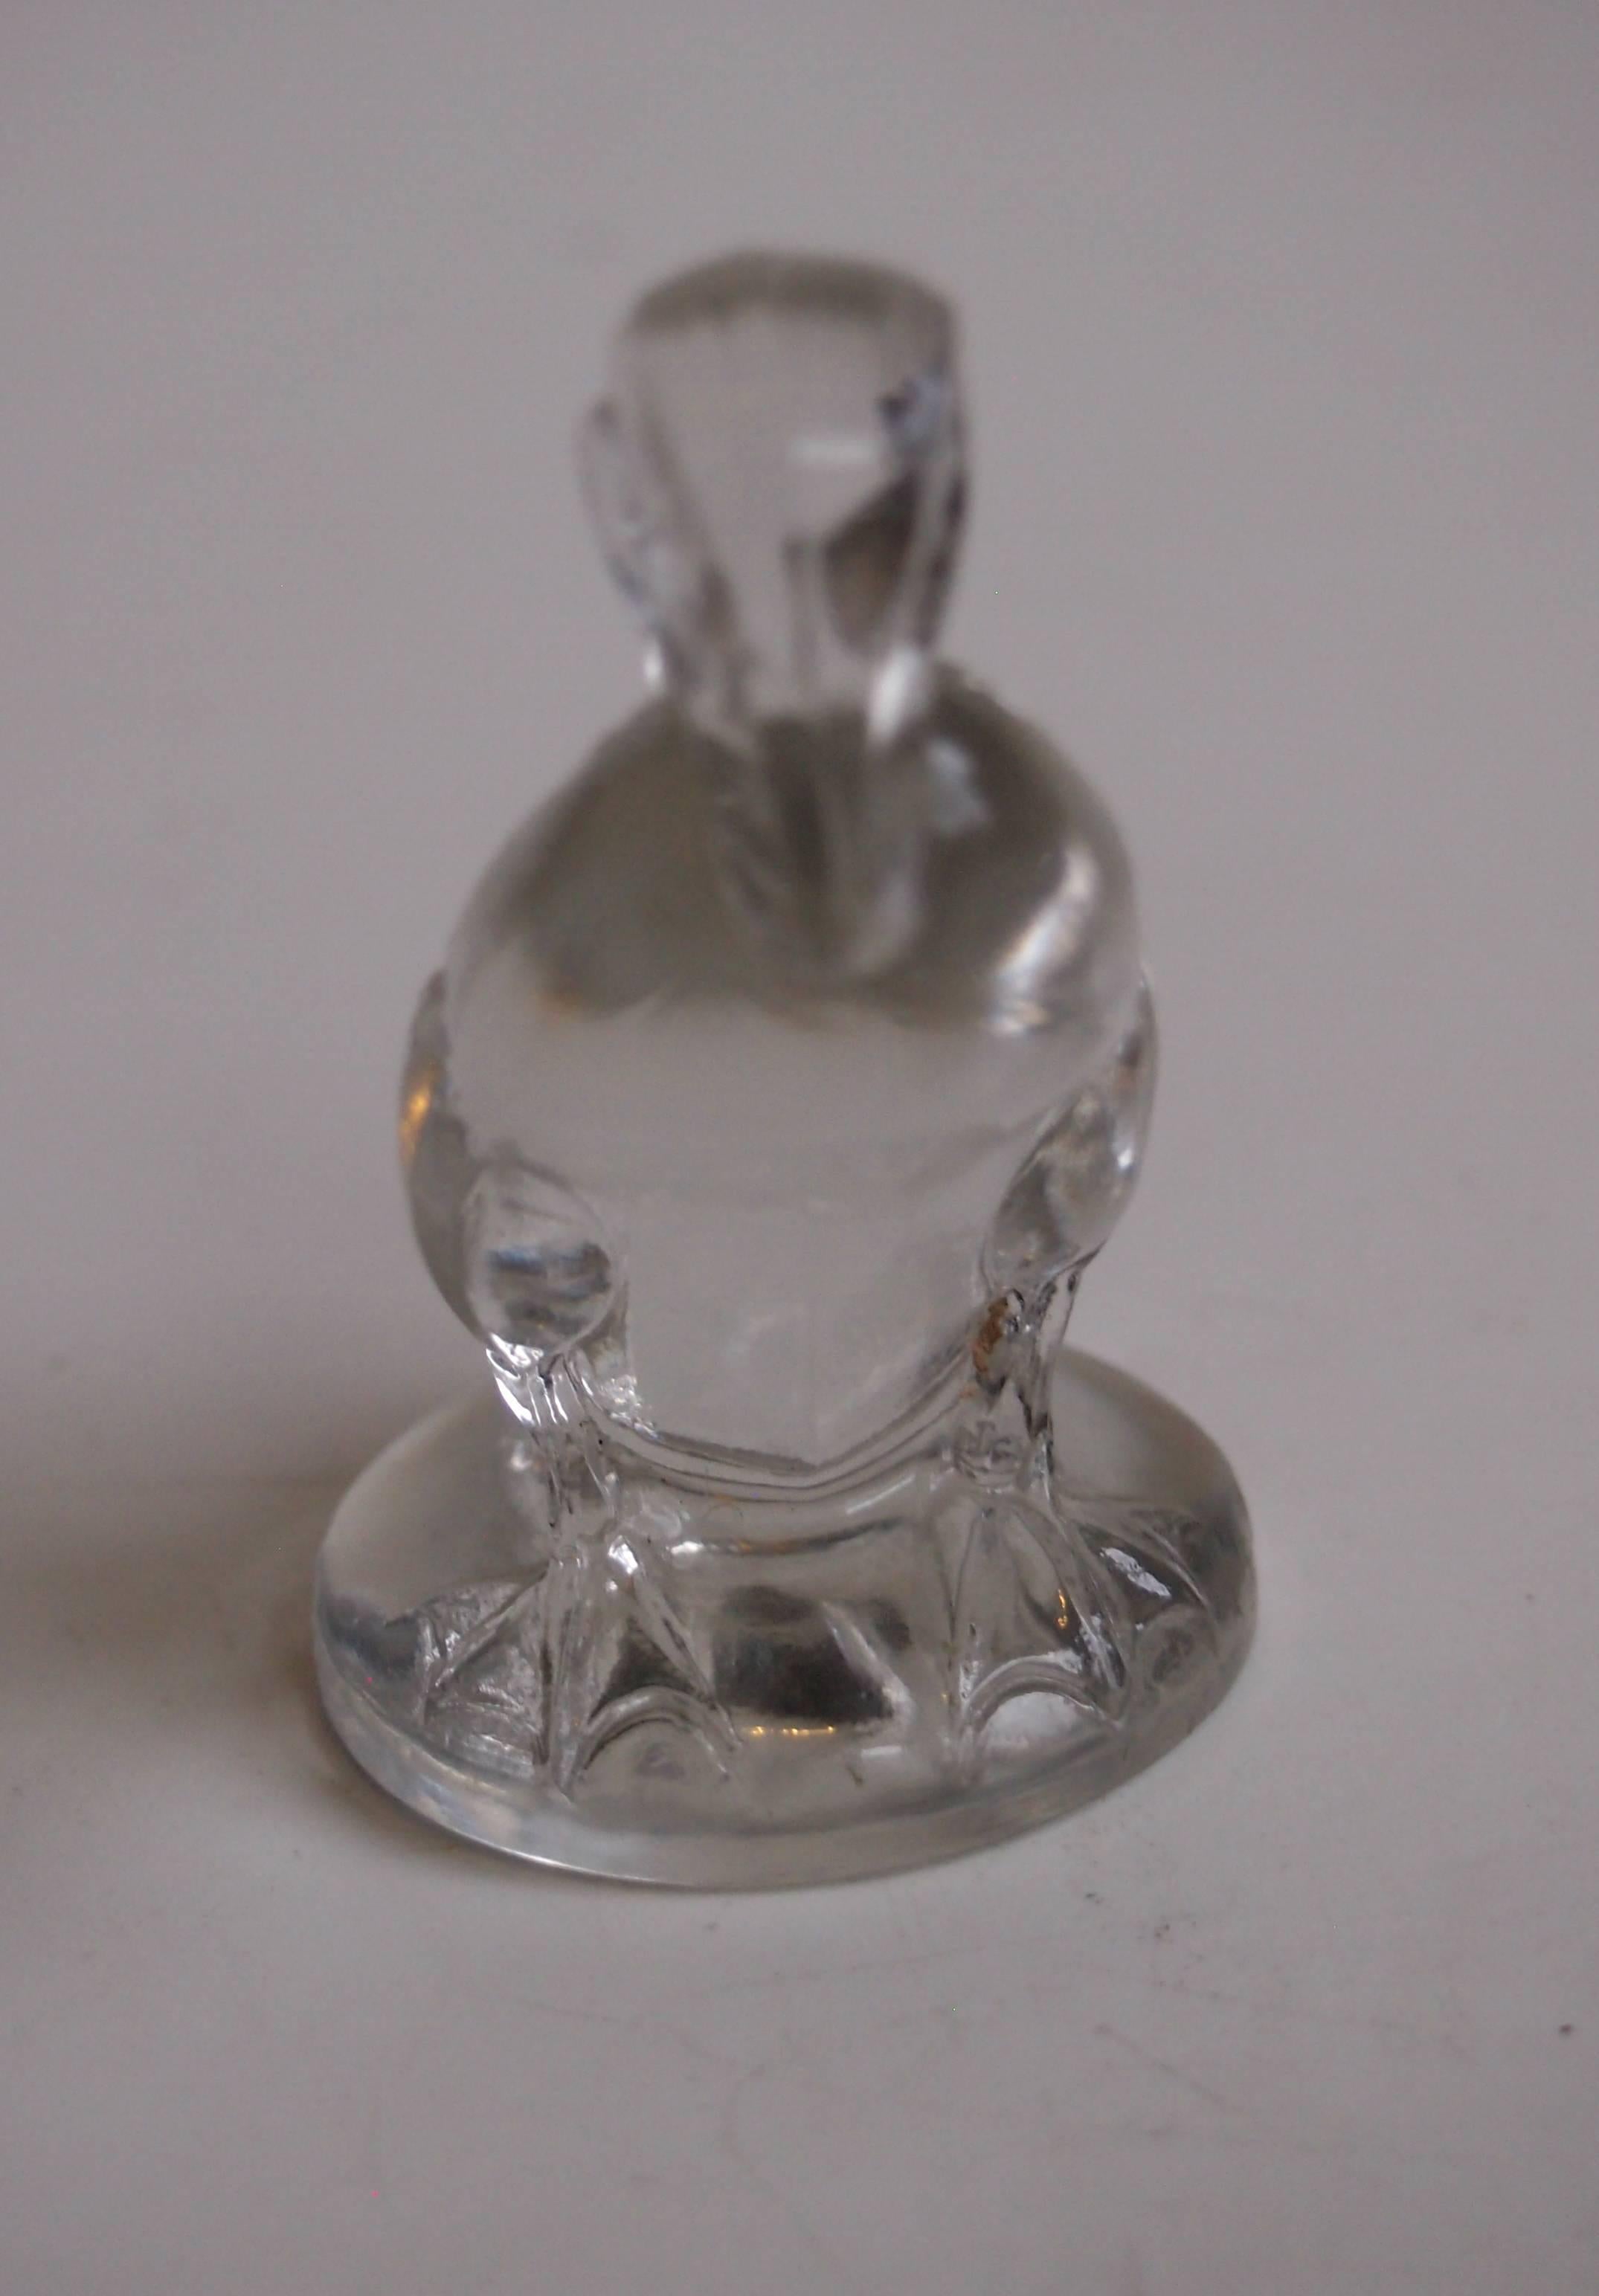 A classic clear and frosted Art Deco signed Rene Lalique 'Canard' (Duck) cachet, dating from 1925 (Marcilhac ref: 219). Cachets were made so you could have your initials cut into the base and then use it to stamp red wax seals for correspondence